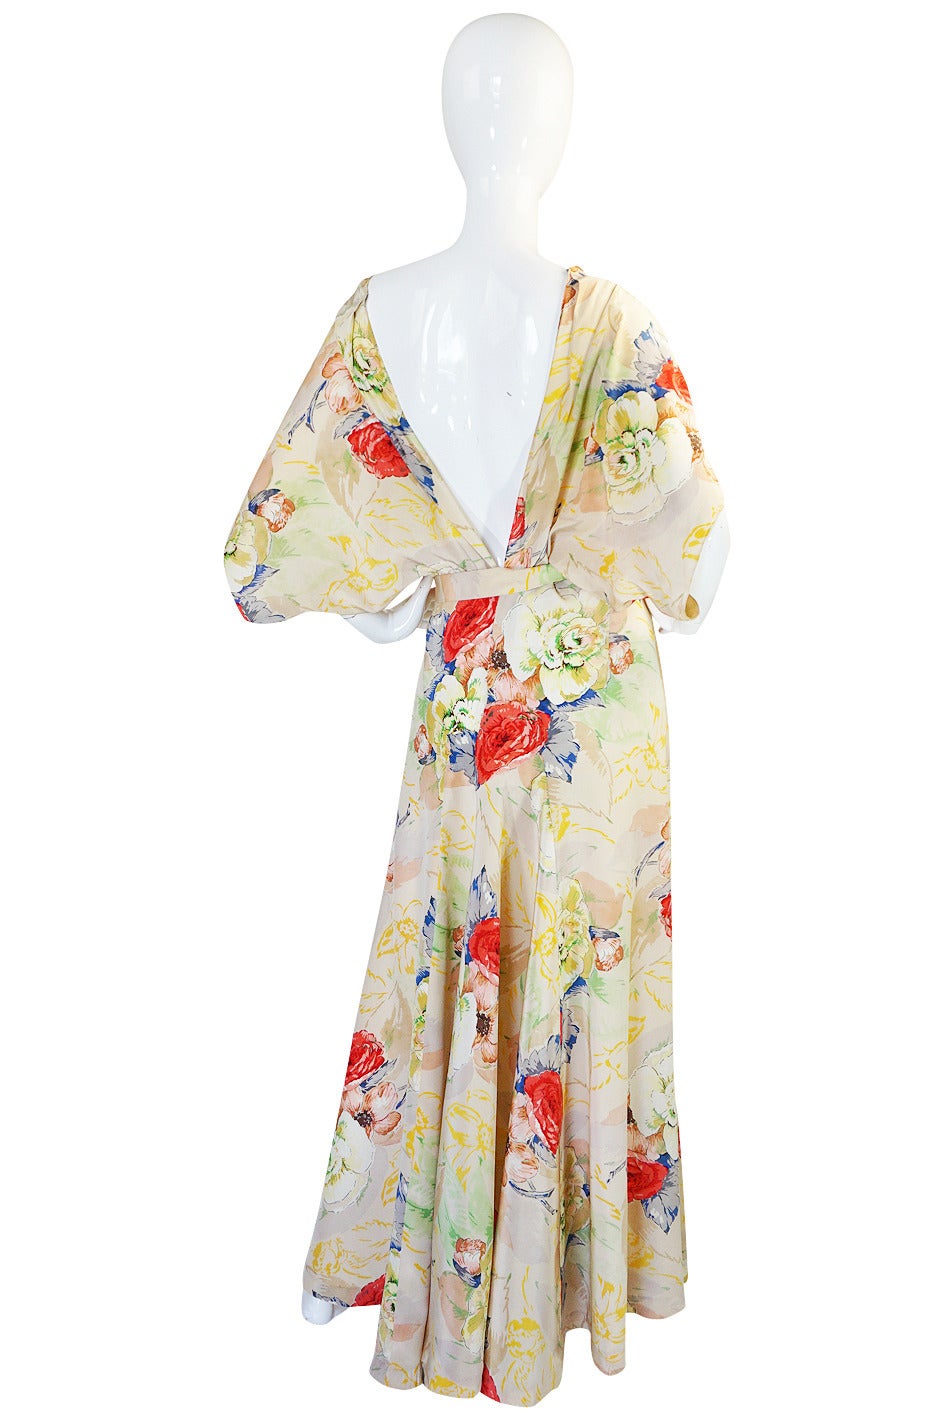 This thirties bias cut silk crepe gown is beautiful. It is completely cut on the bias so drapes and moves to fit you perfectly from the second you slip it over your head. The front has a soft and romantic capelet feel to it with a notched neckline